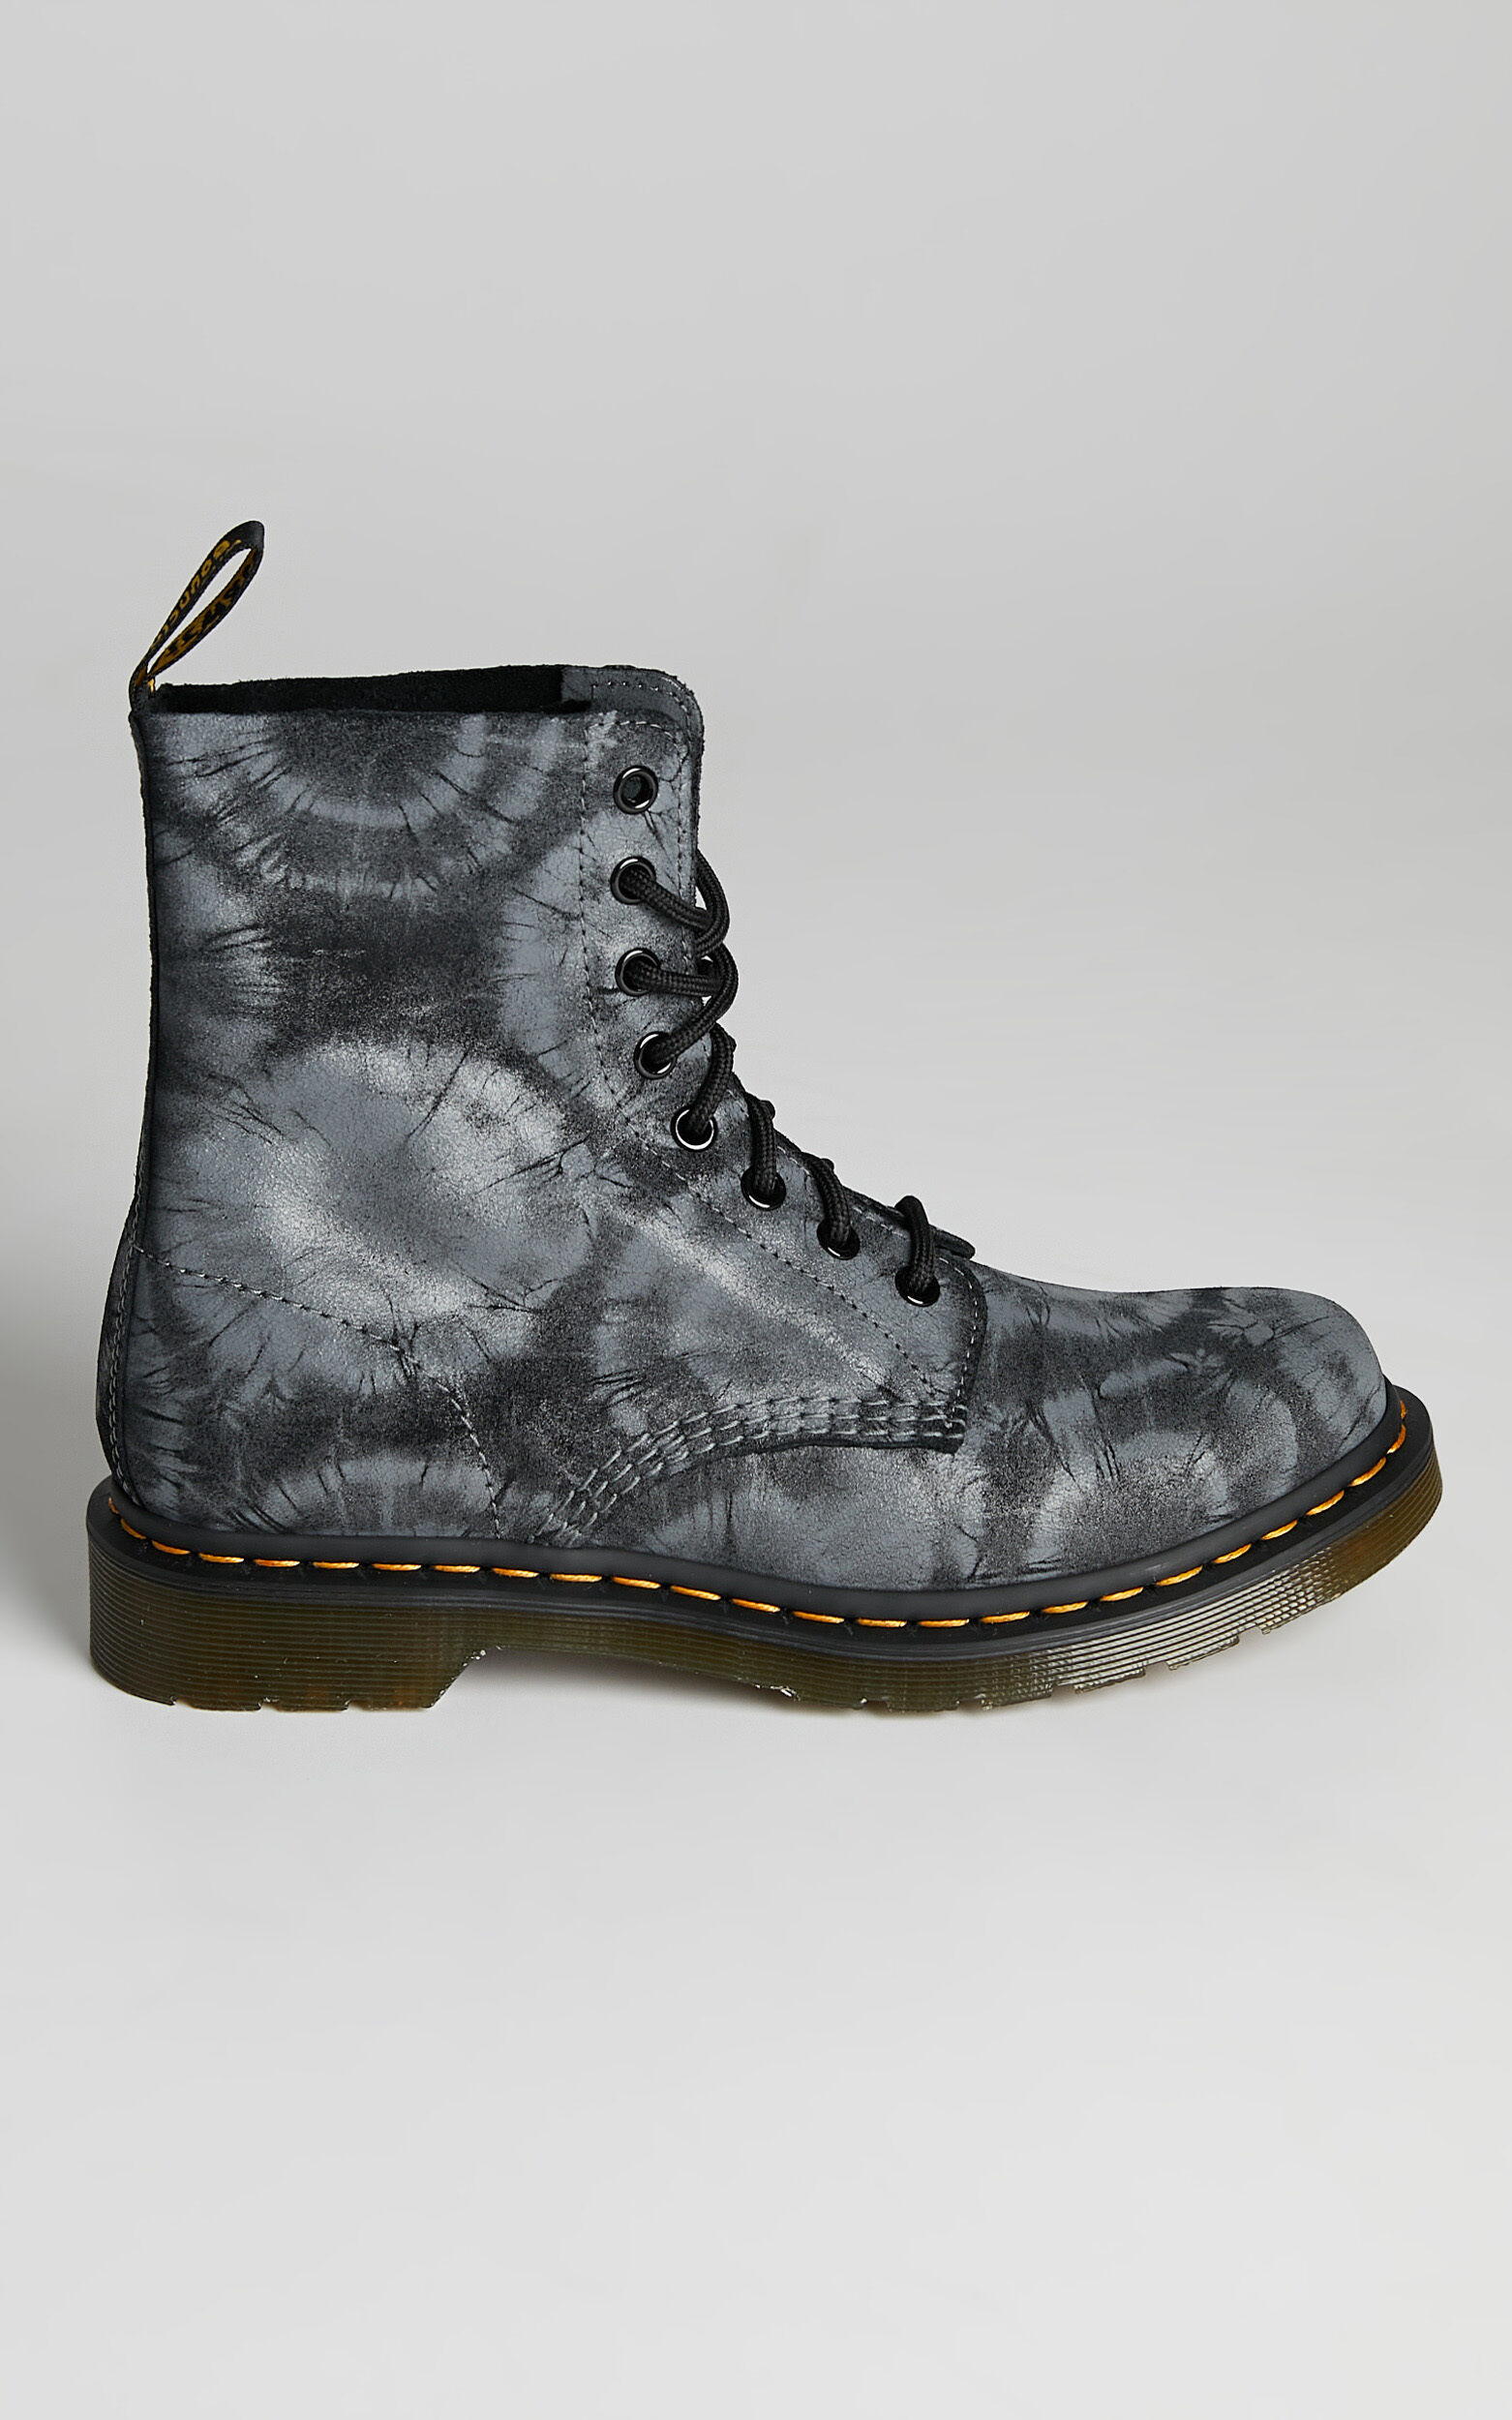 Dr. Martens - 1460 Pascal Tie Dye Boots in Black Charcoal Grey Tie Dye Printed Suede - 05, BLK1, super-hi-res image number null